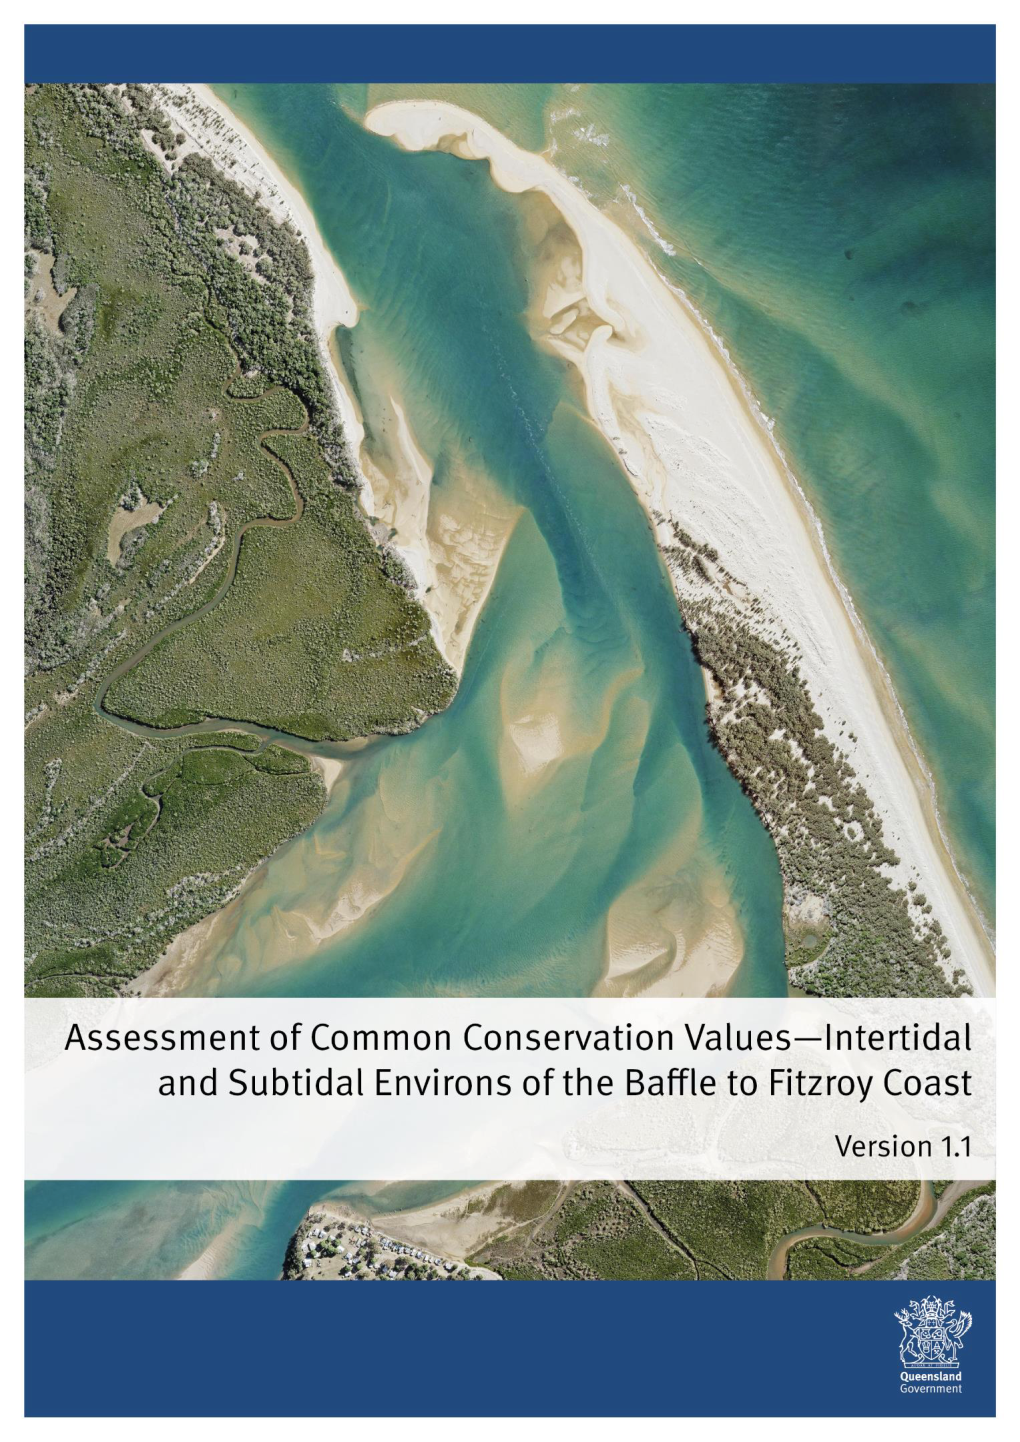 Assessment of Common Conservation Values - Intertidal and Subtidal Environs of the Baffle to Fitzroy Coast - Version 1.1